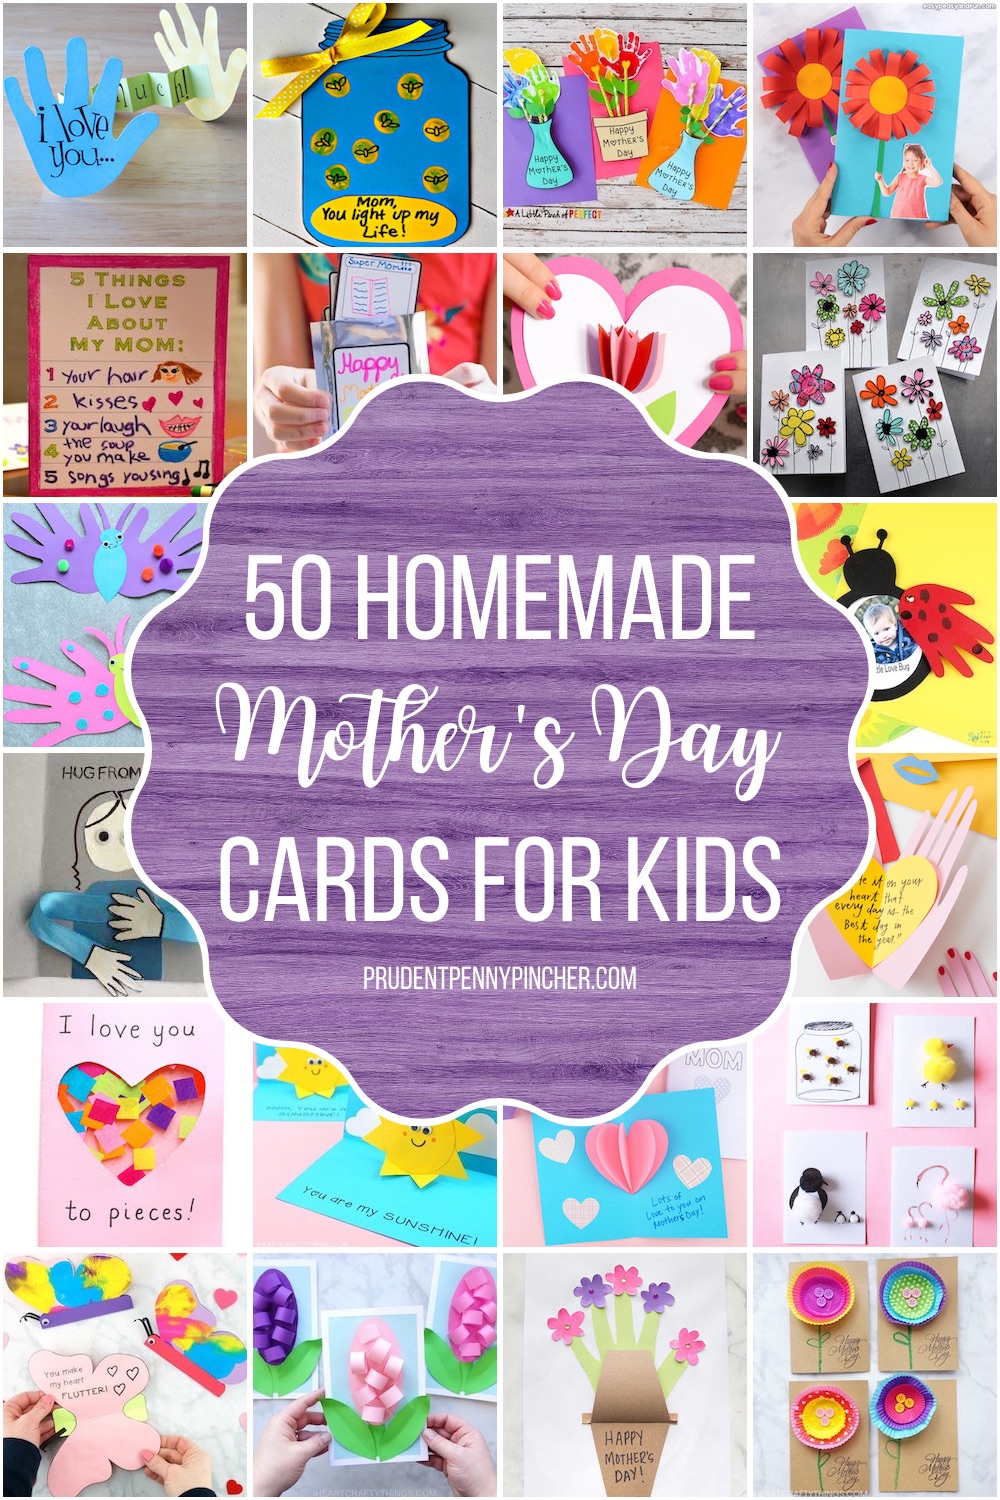 Mother's Day Gift Guide 2022 - My Frugal Adventures